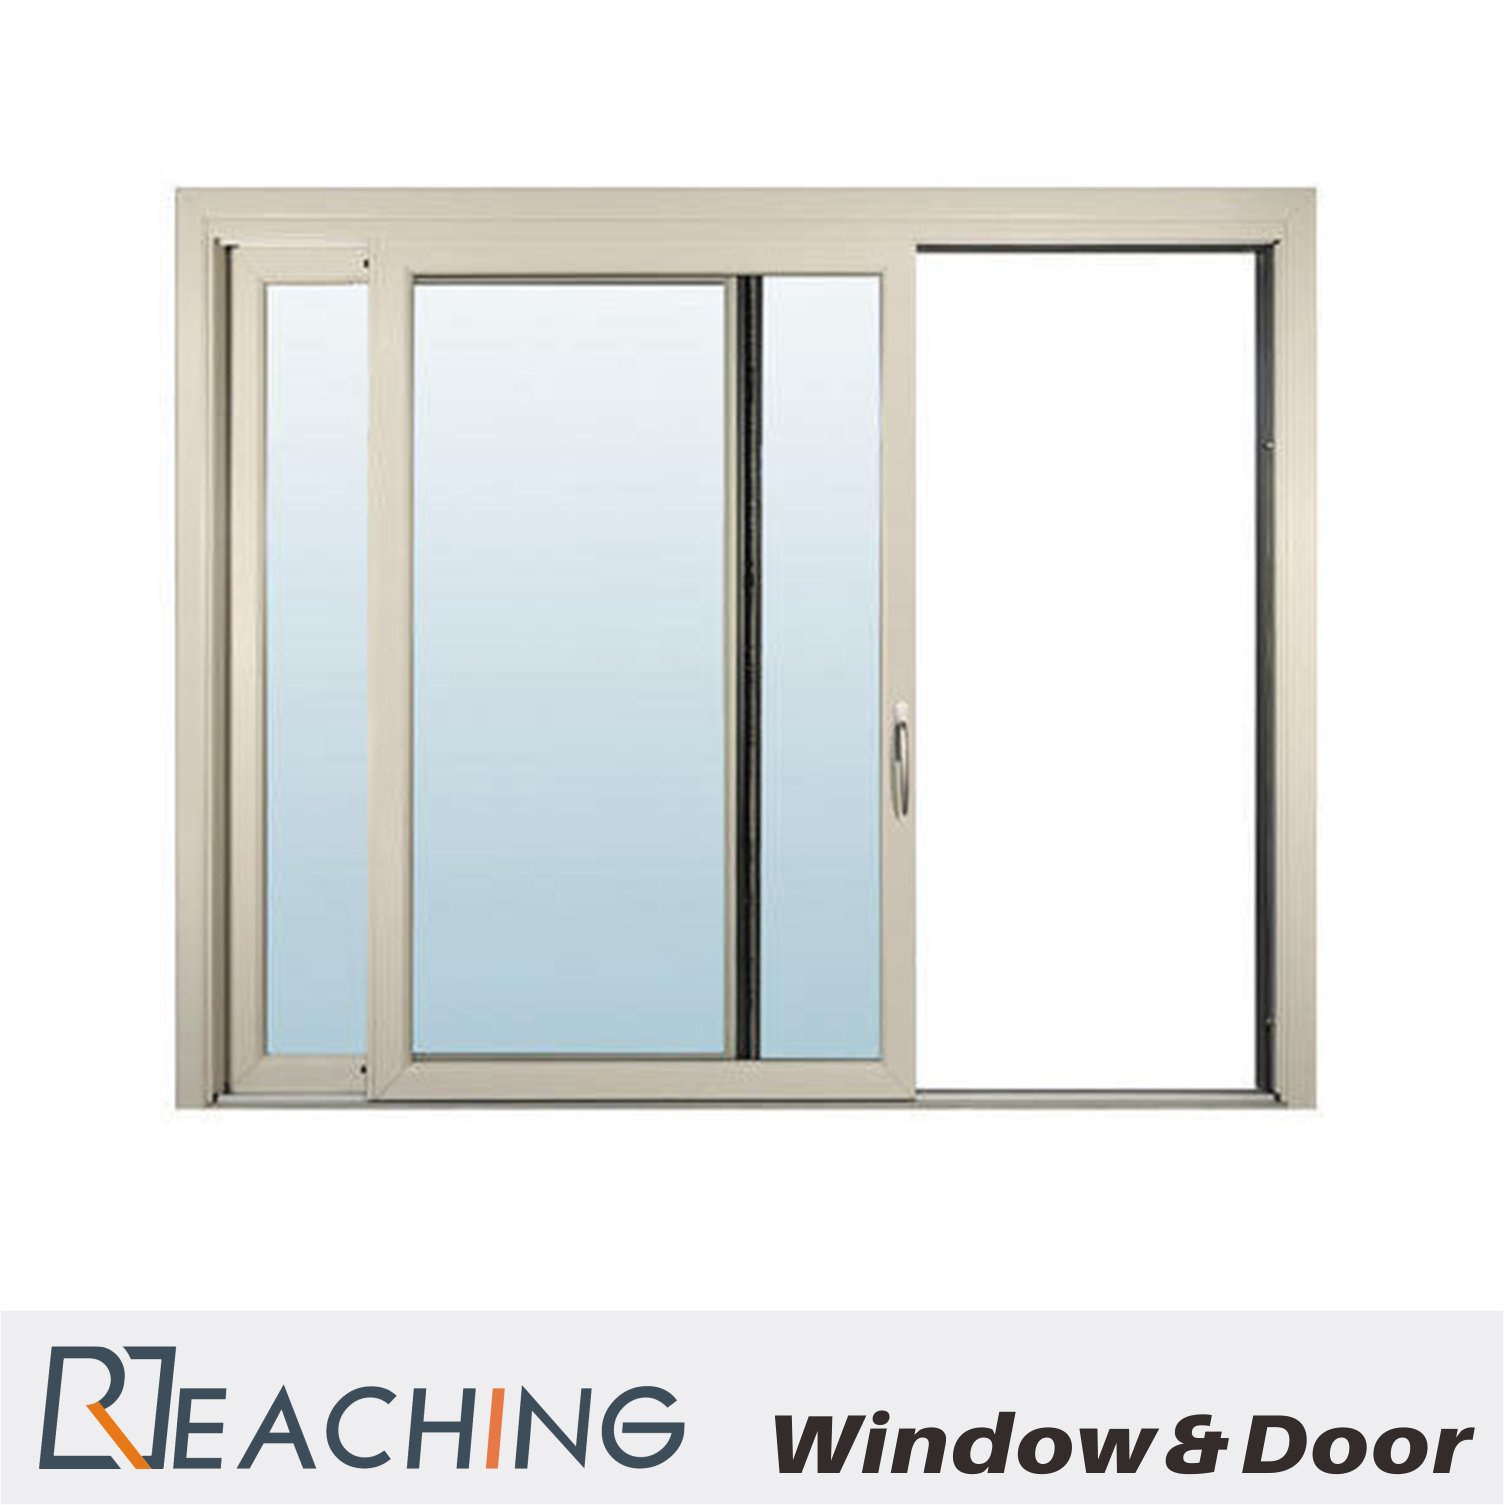 Blue Tinted Color Double Low E Glass Aluminium Window Modern Design From China Manufacturer